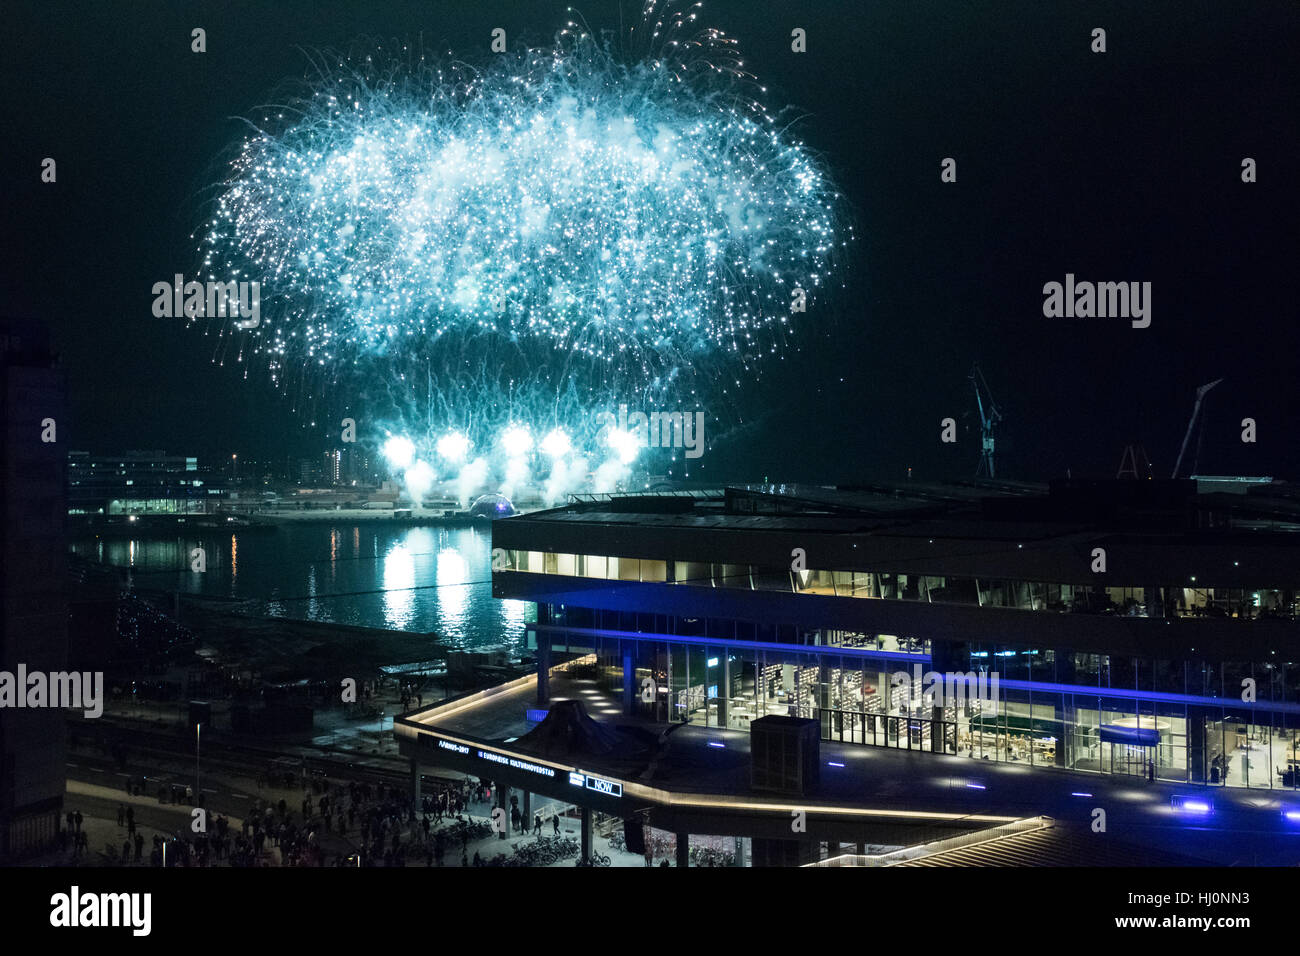 Aarhus, Denmark. 21st Jan, 2017. Denmark’s second city, Aarhus, has been recognised as the 2017 European Capital of Culture and hosted the opening ceremony in style. Aarhus will use the year’s festivities to promote the diversity of culture in the city and can expect to welcome around 10 million visitors throughout the year. Tourists and locals alike will be treated to hundreds of events, performances and art installations all year which are expected to generate upwards of €800m in tourism. Credit: Matthew James Harrison/Alamy Live News Stock Photo